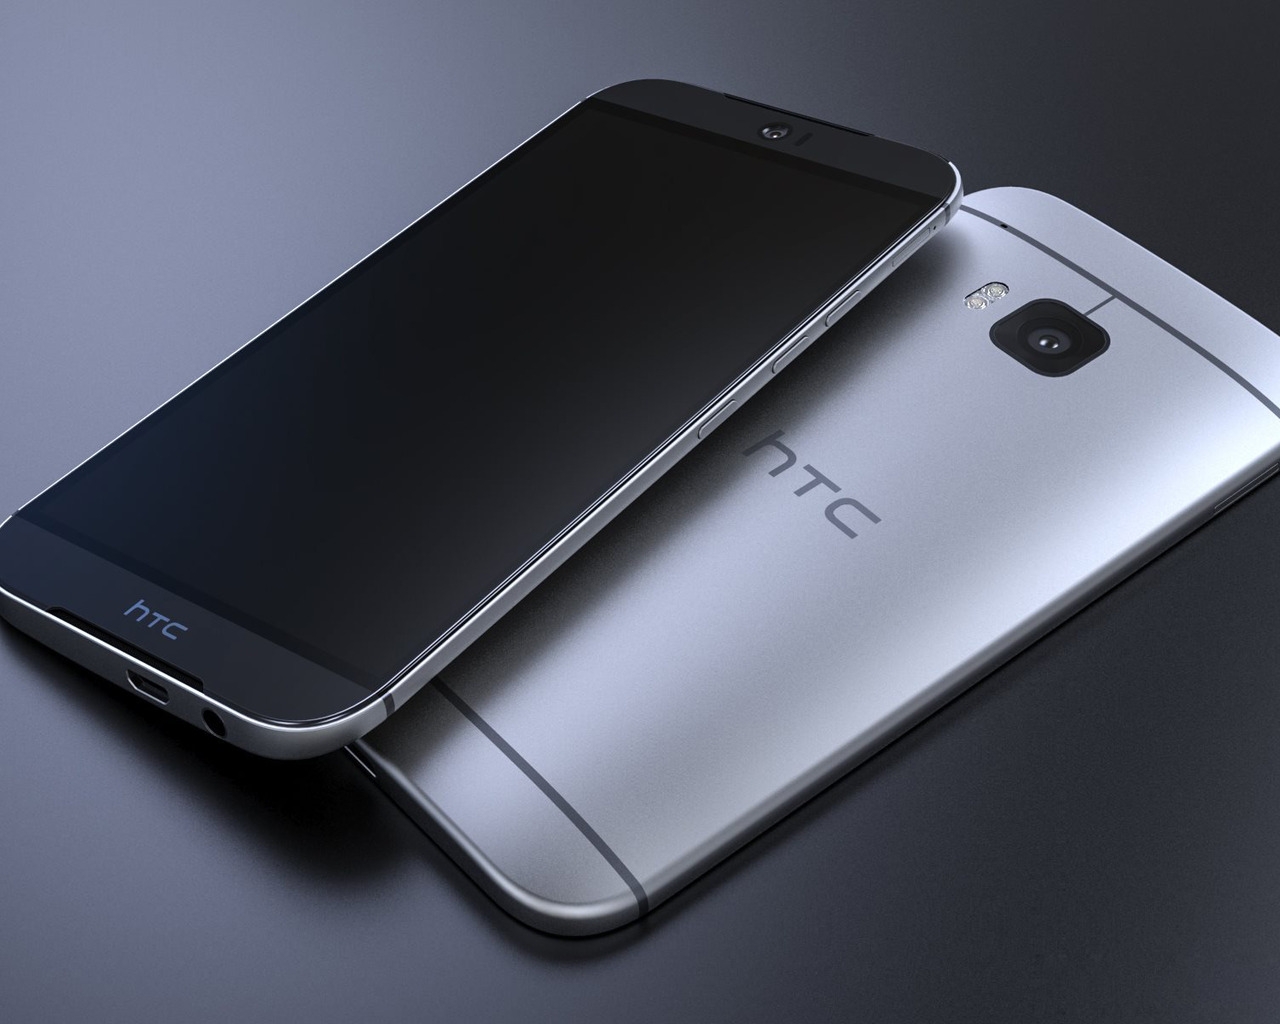 HTC One M9 for 1280 x 1024 resolution